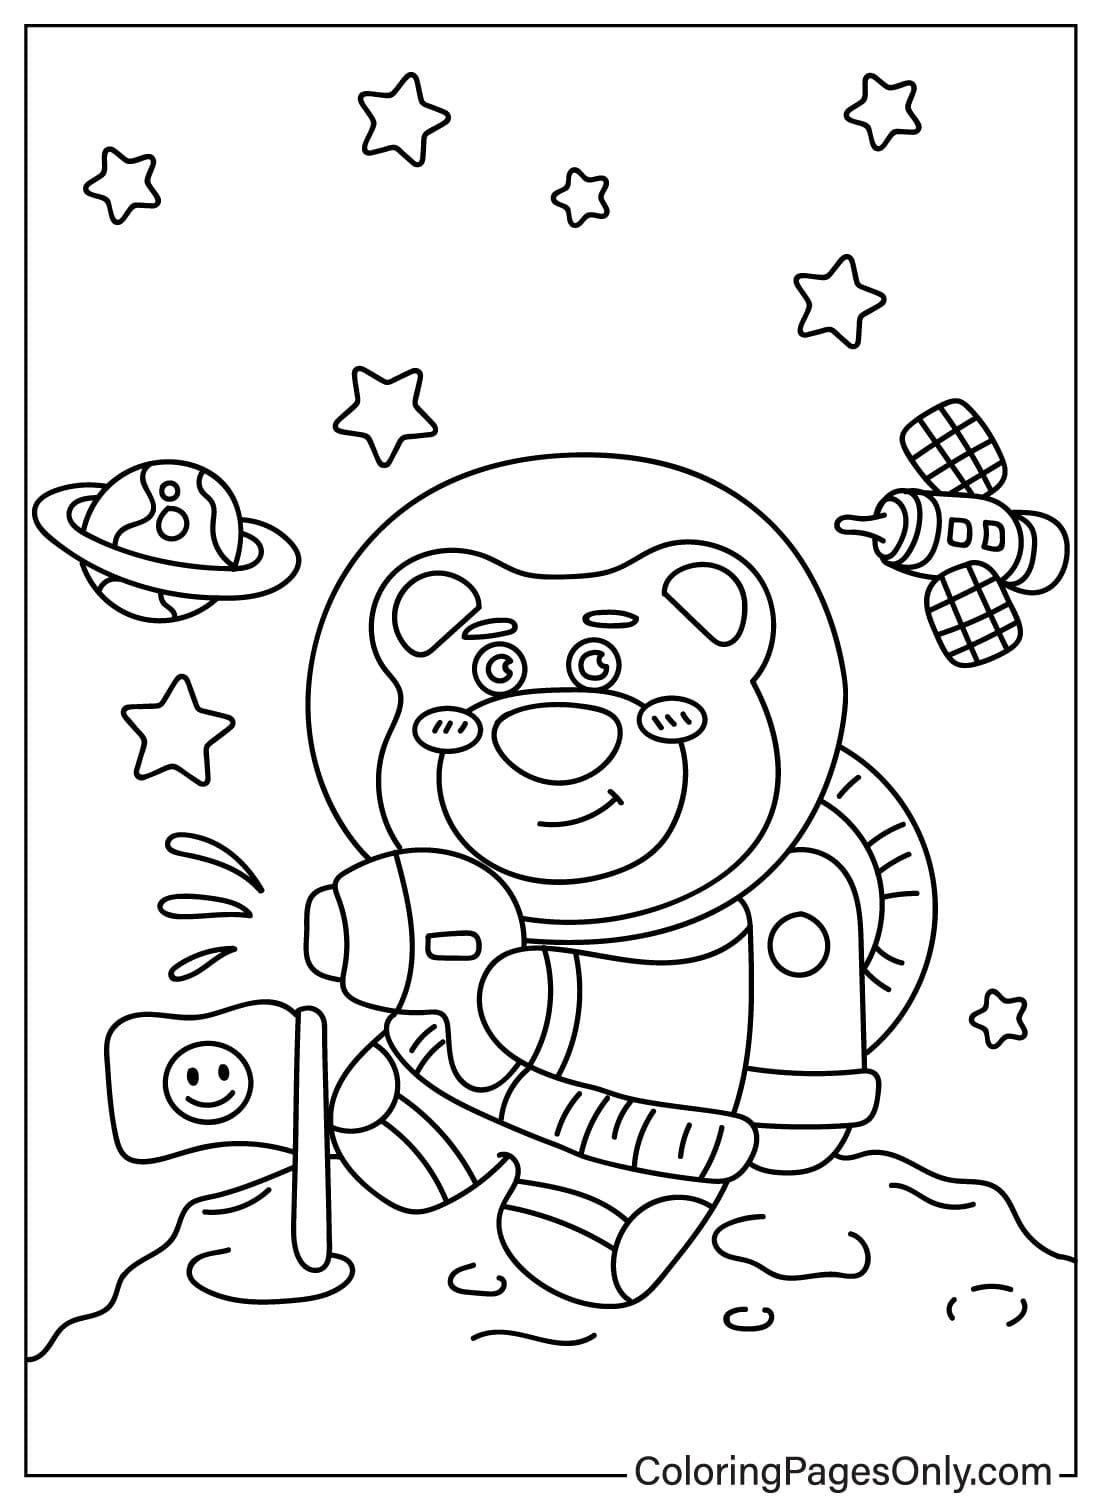 Lotso Bear Pictures Coloring Book from Lotso Bear